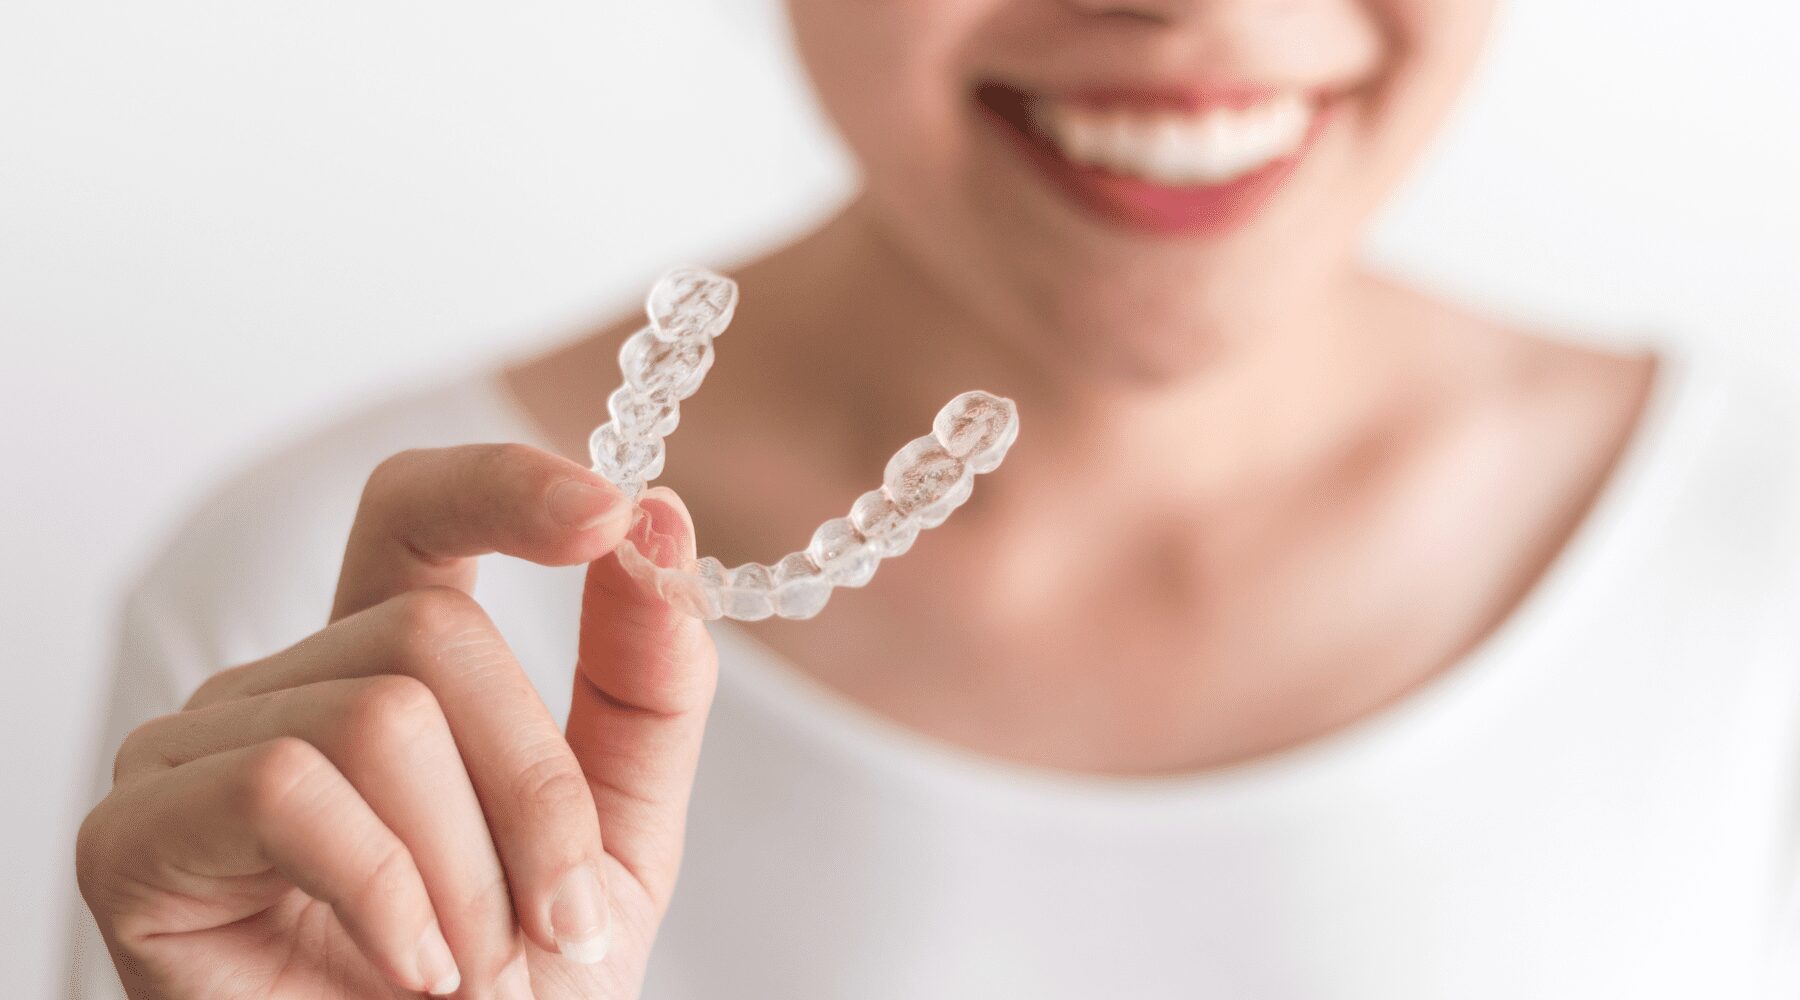 Invisalign Clear Aligners in Charlotte, NC at Charlotte Midtown General & Cosmetic Dentistry